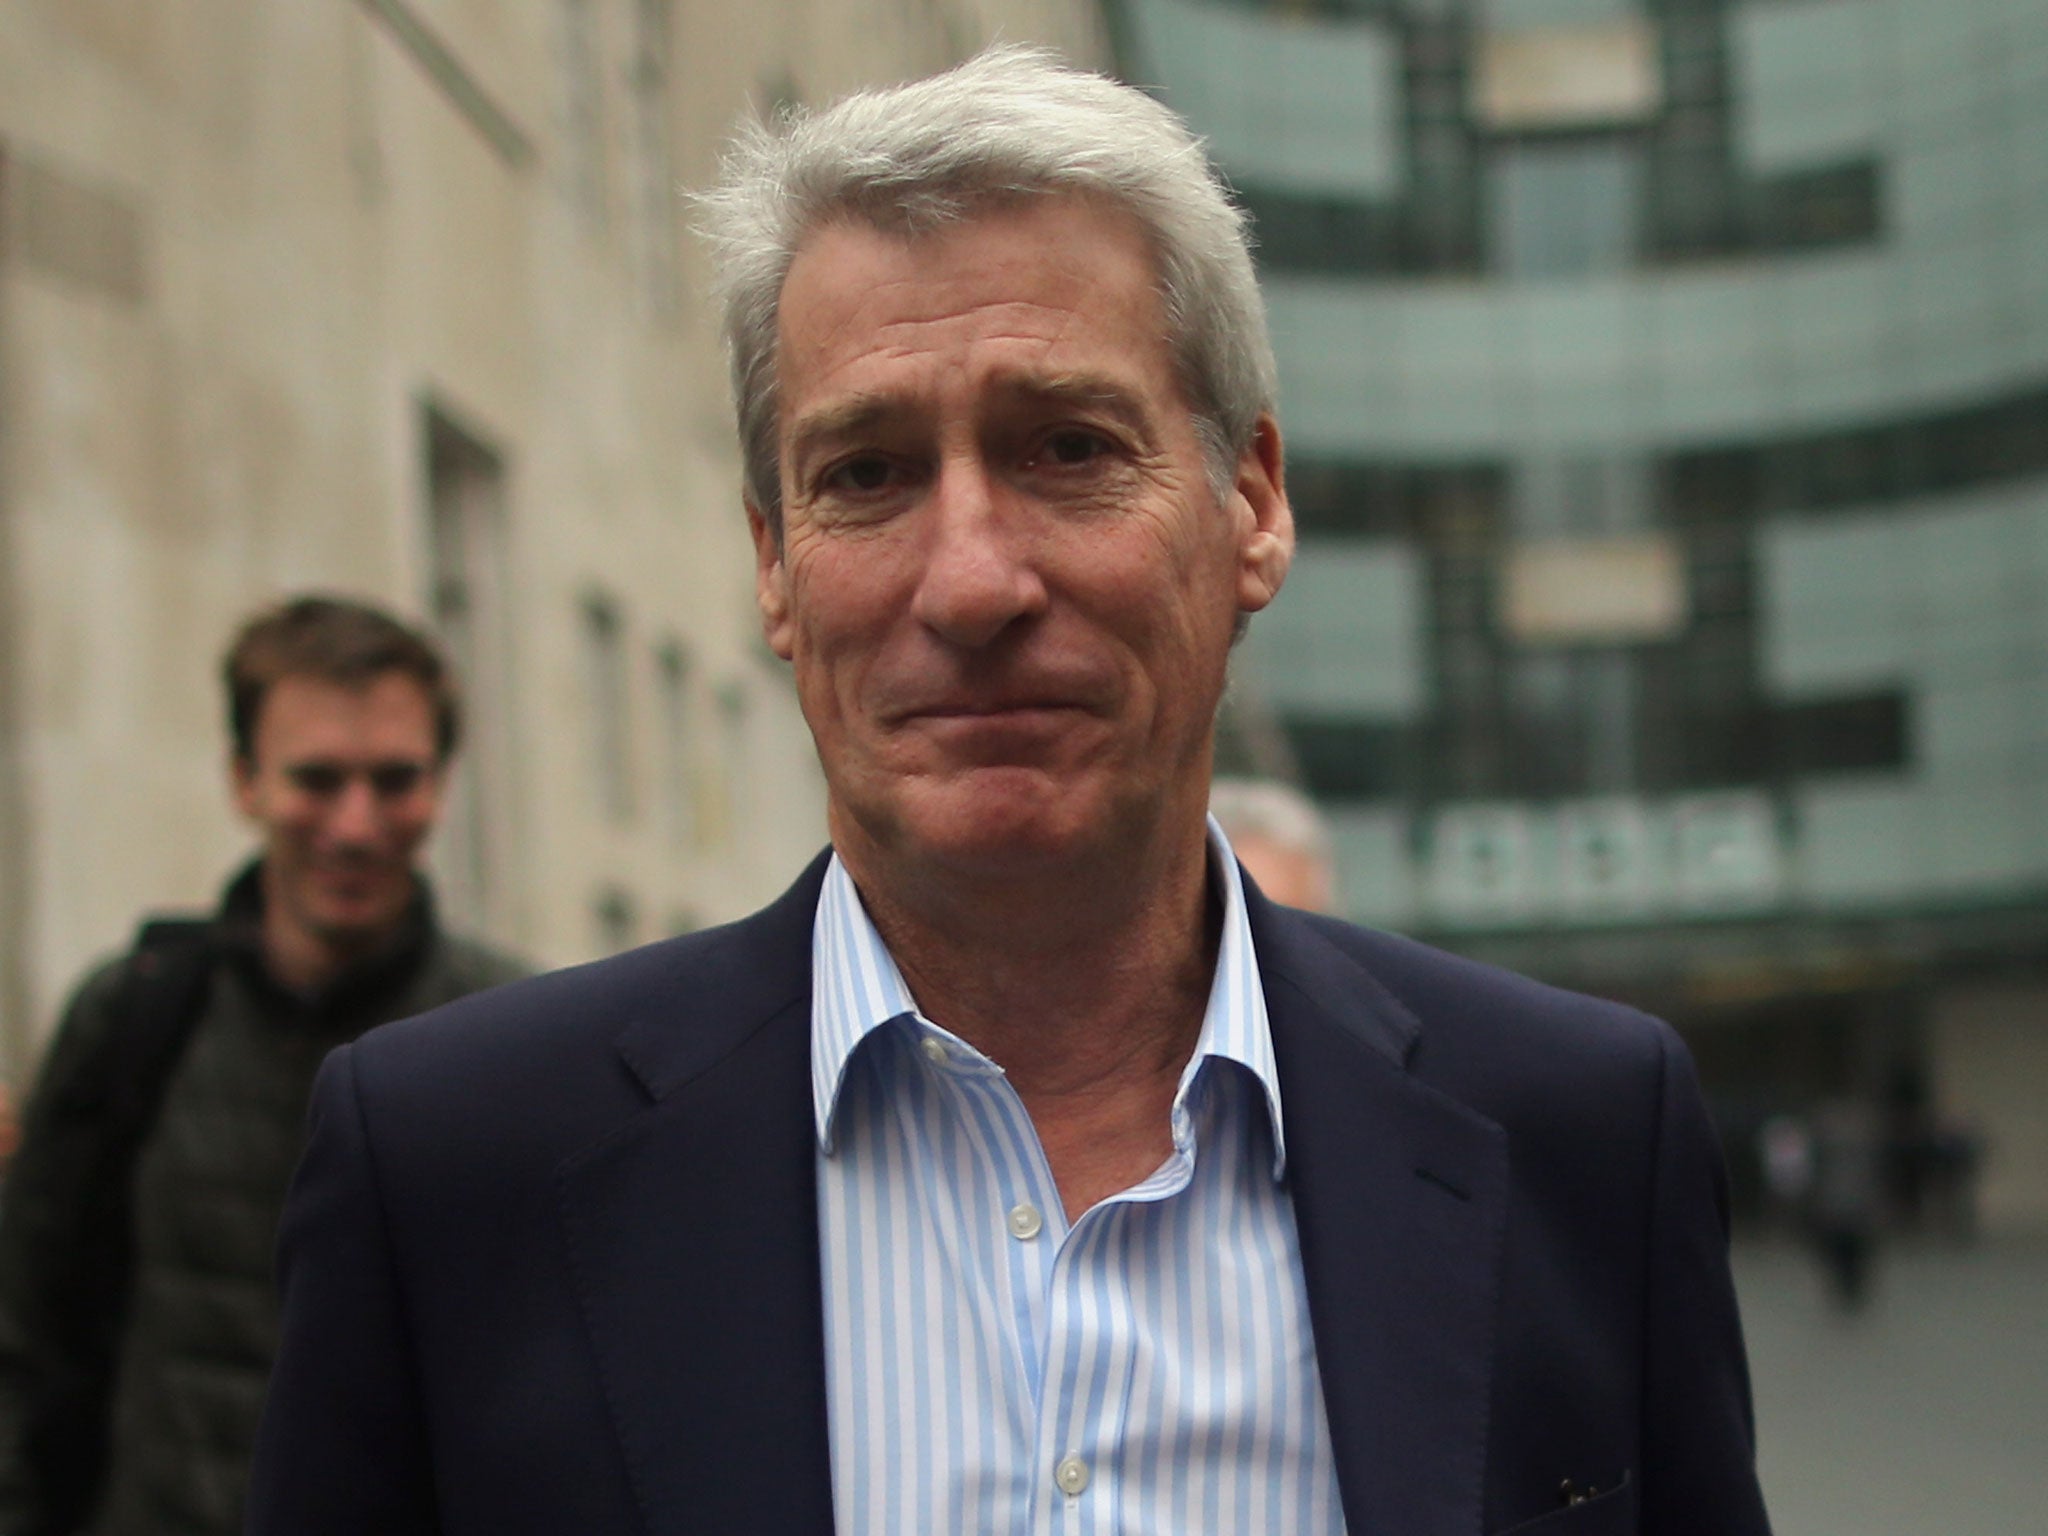 Jeremy Paxman said he had been forced to "come out" as a royalist